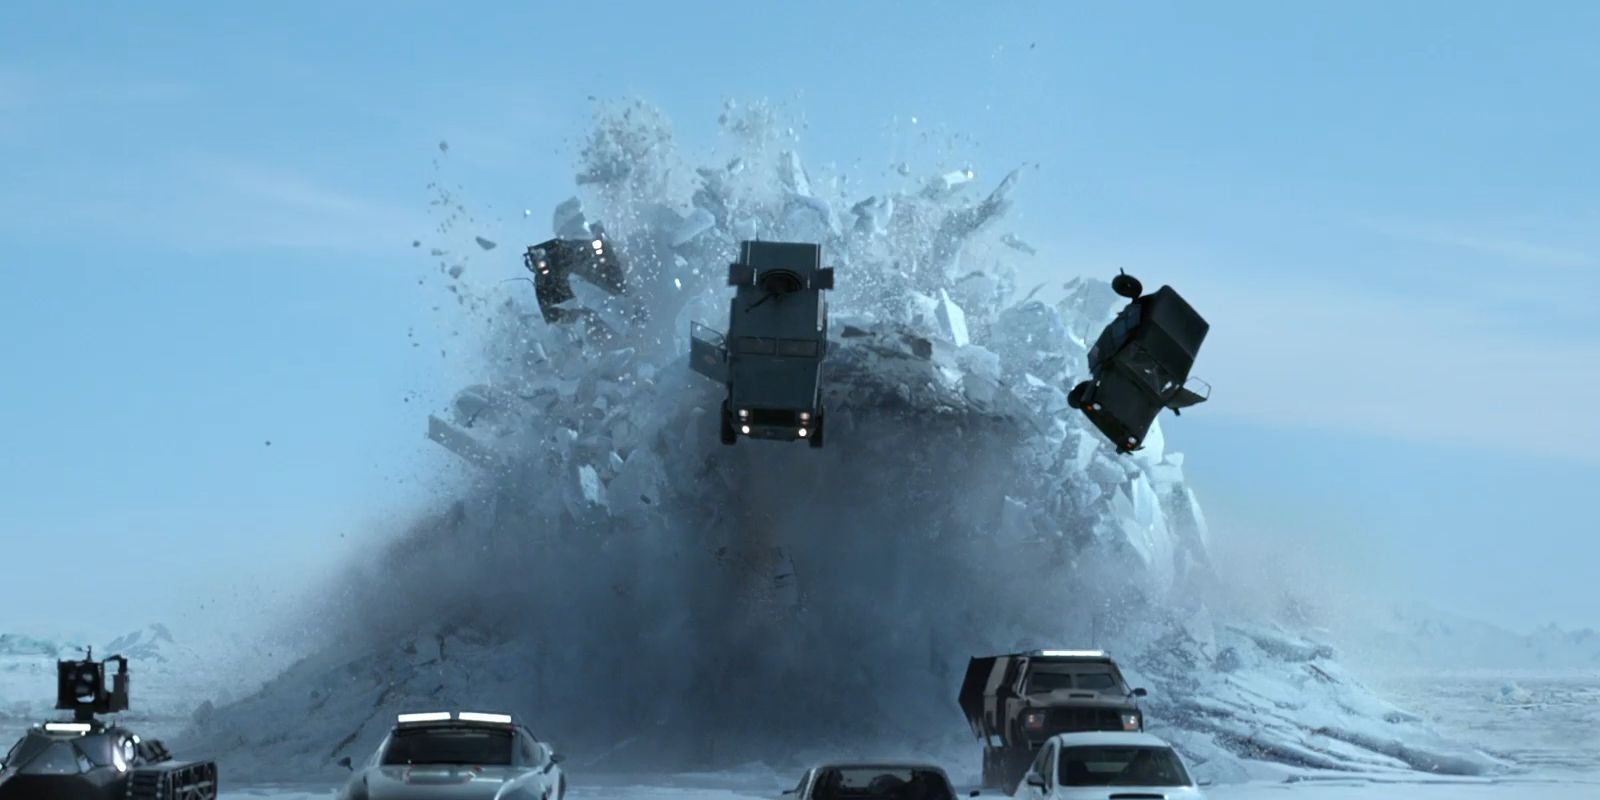 Submarine Bursts Thorugh Ice in Fate of the Furious